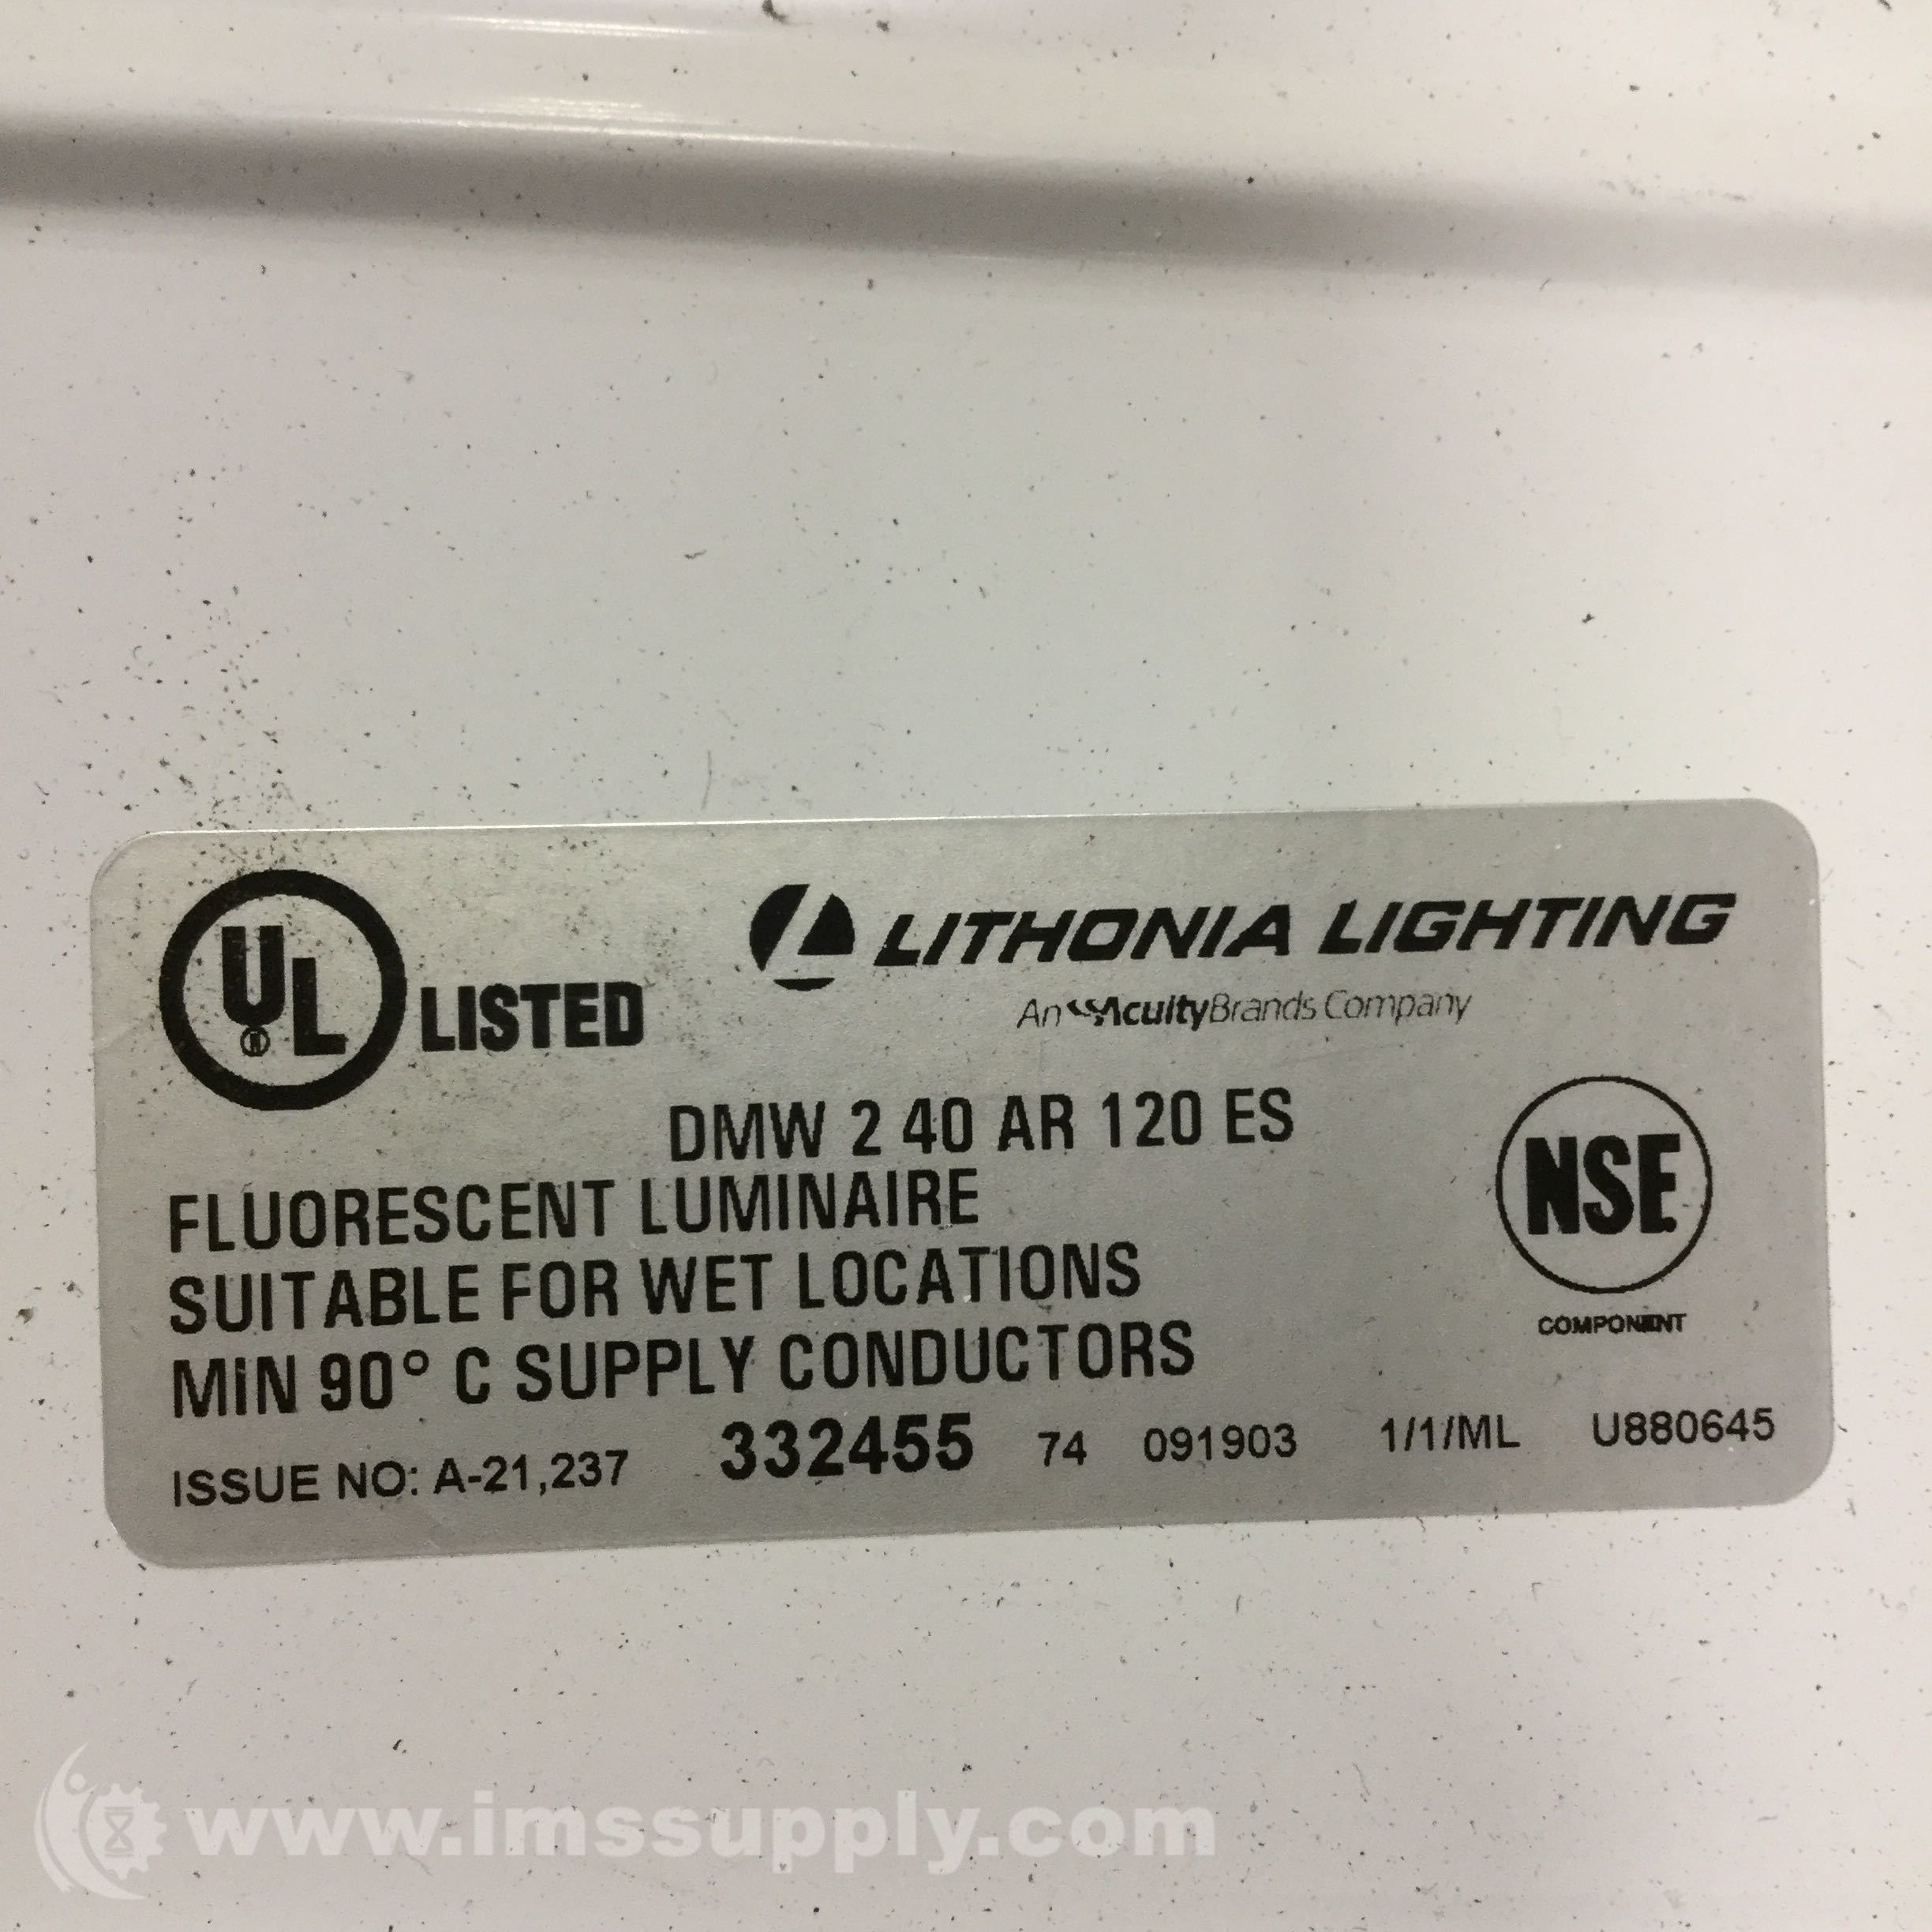 Issue No Lithonia Ligthing Fluorescent Luminaire A-21,237 USED 